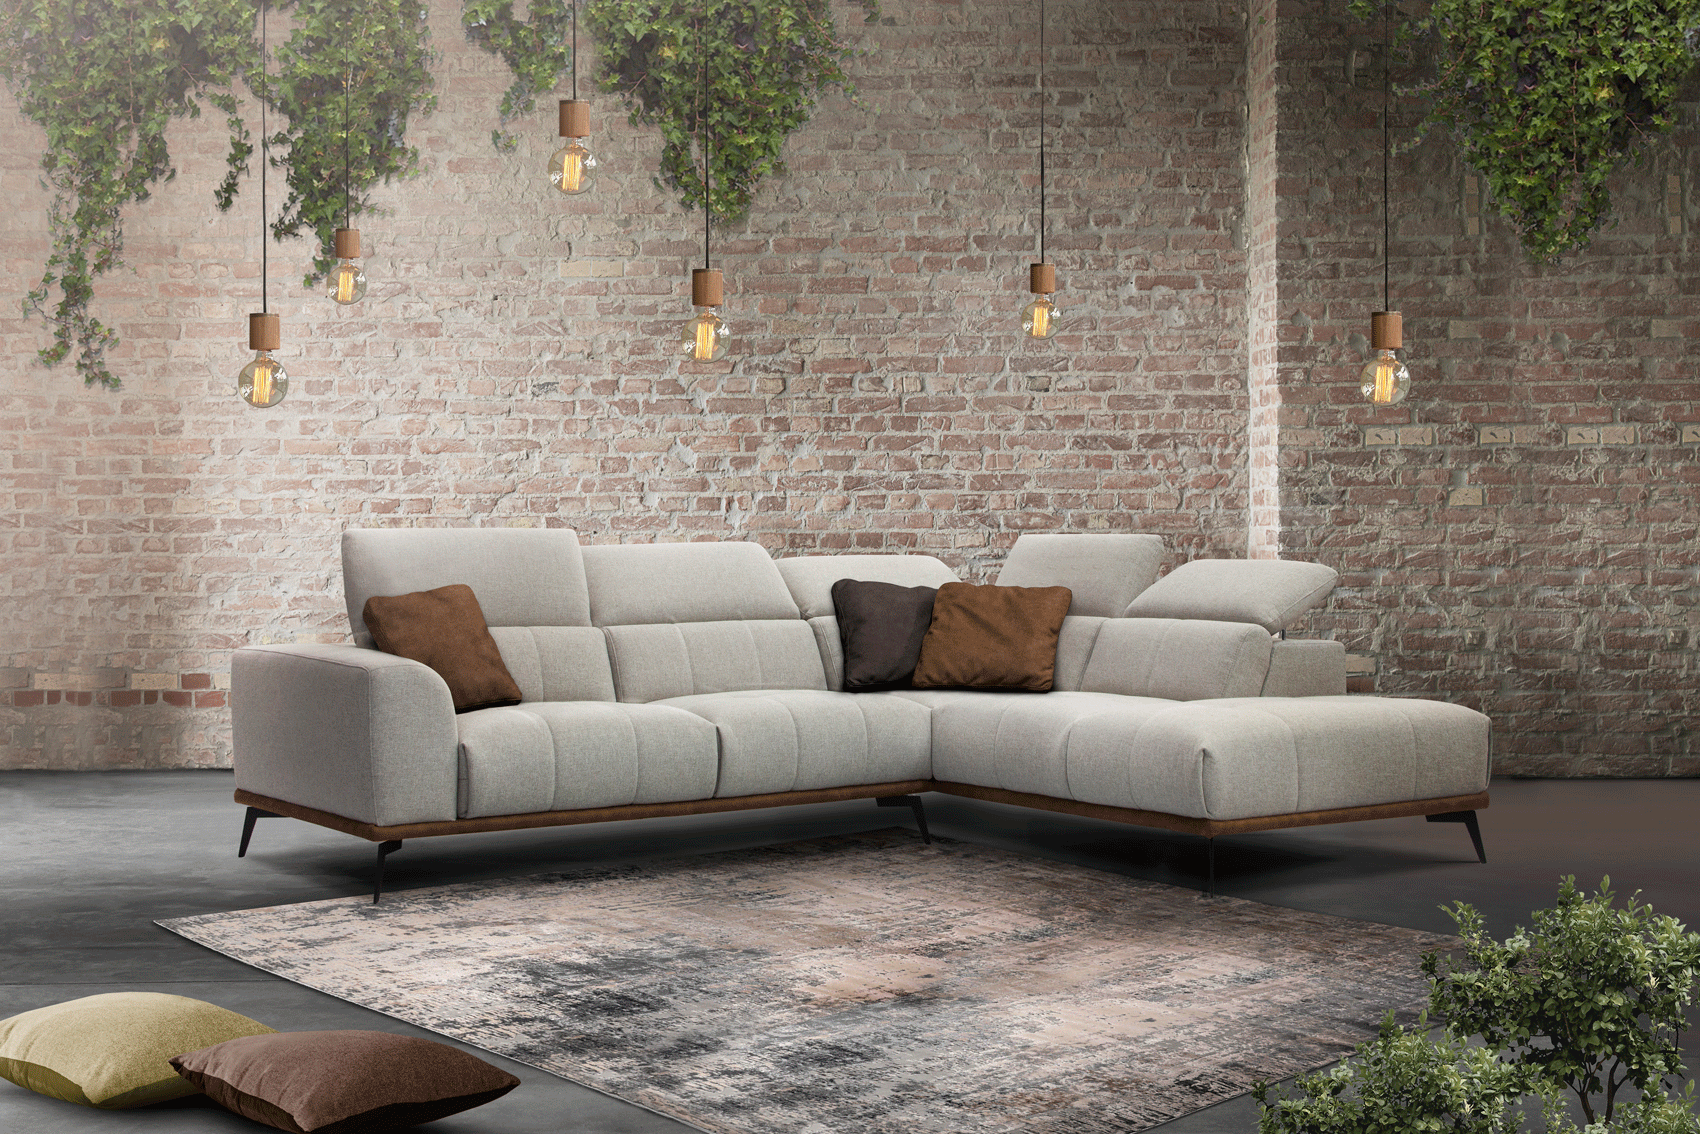 Contemporary Style Microsuede Fabric Sectional Sofa